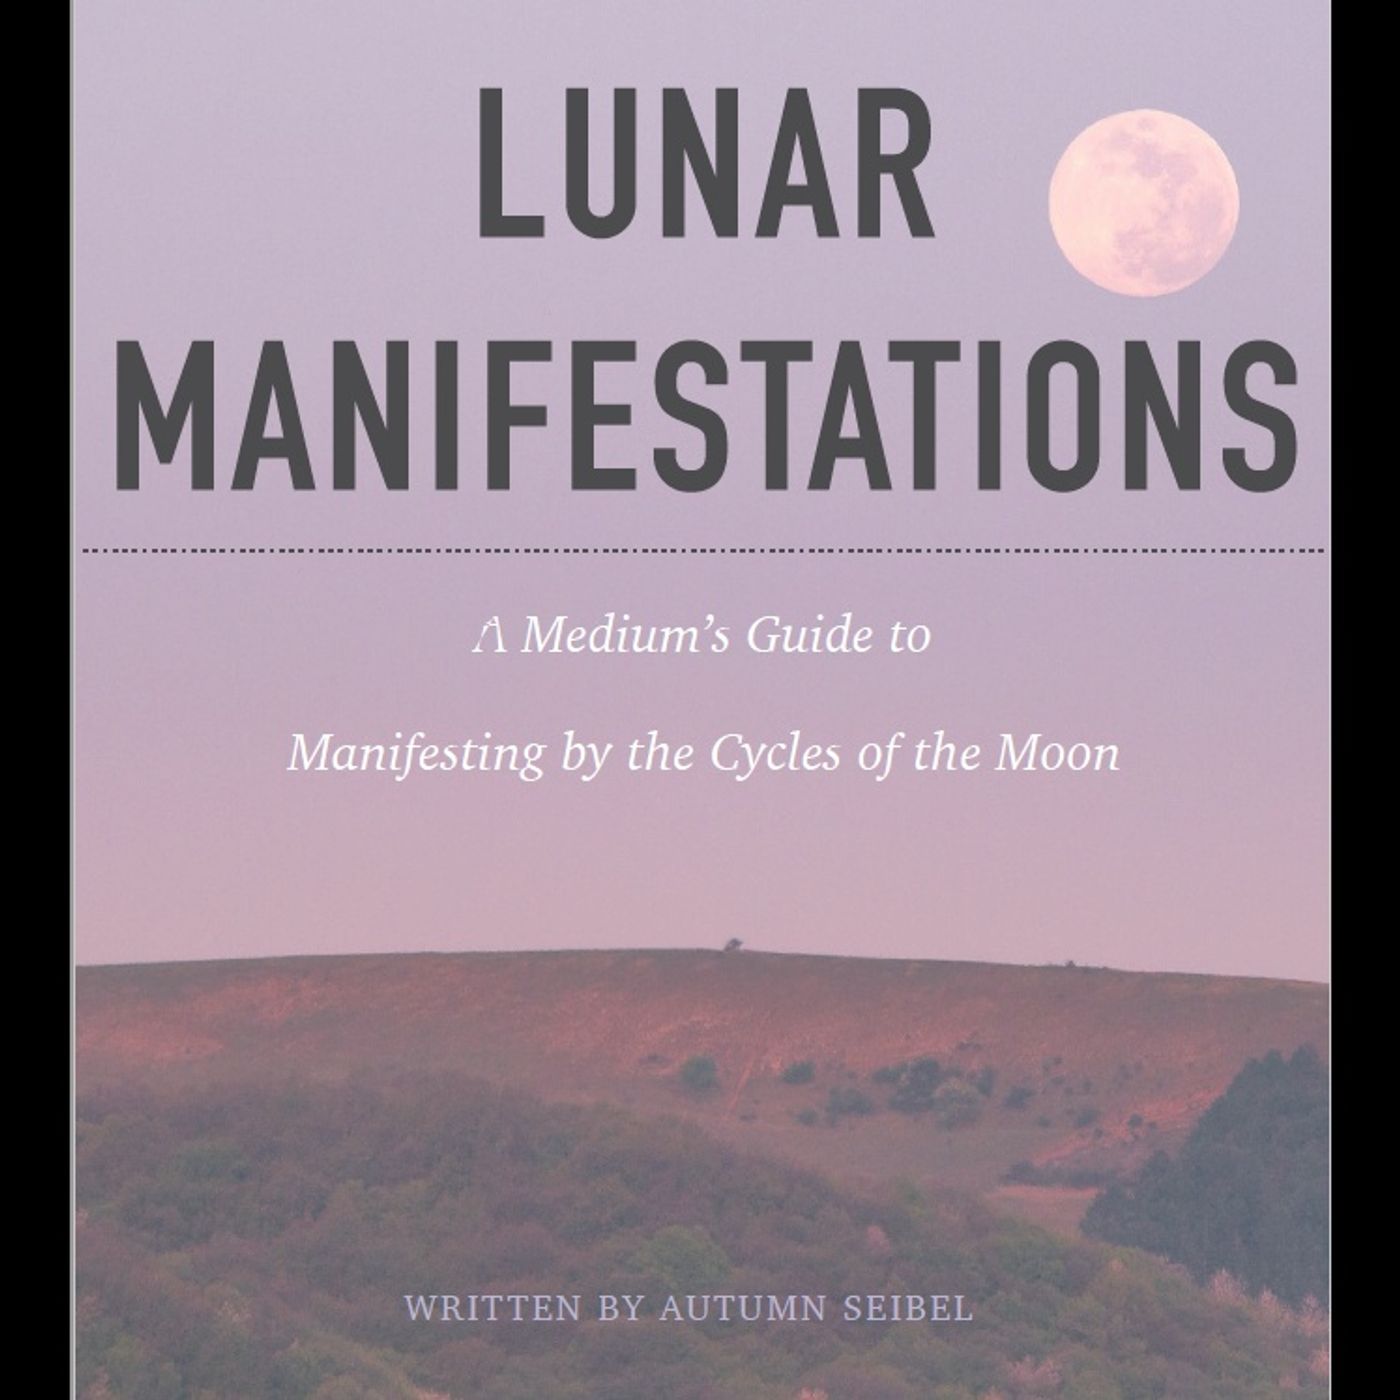 Lunar Manifestations: A Medium's Guide to Manifesting by the Cycles of the Moon